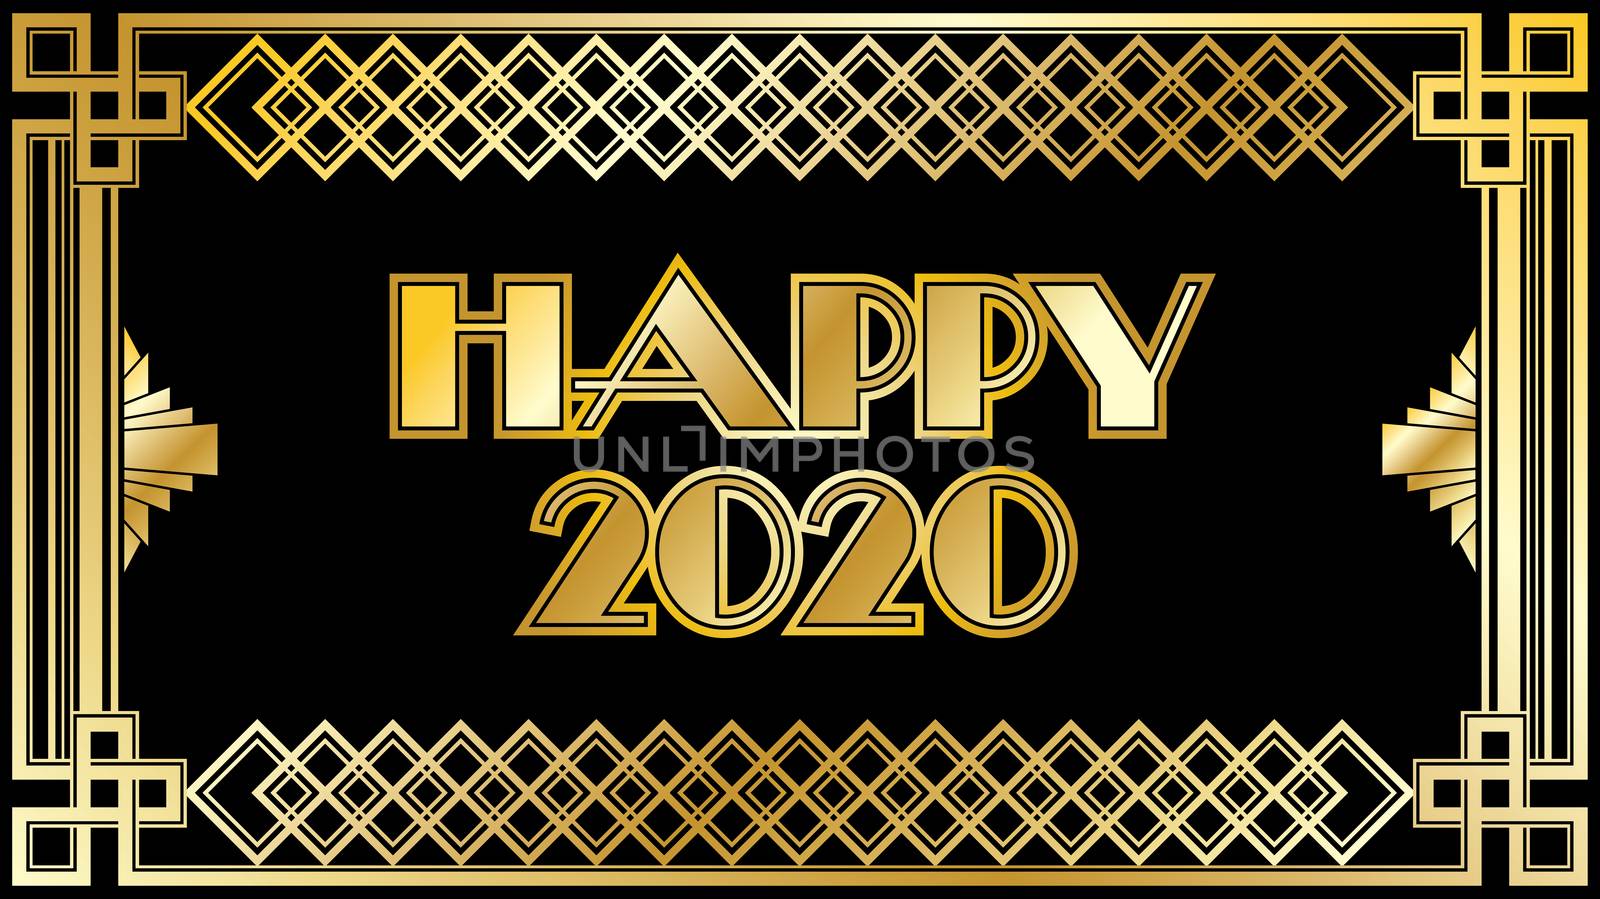 2020 New years Countdown clock changing numeral with festive bac by illstudio